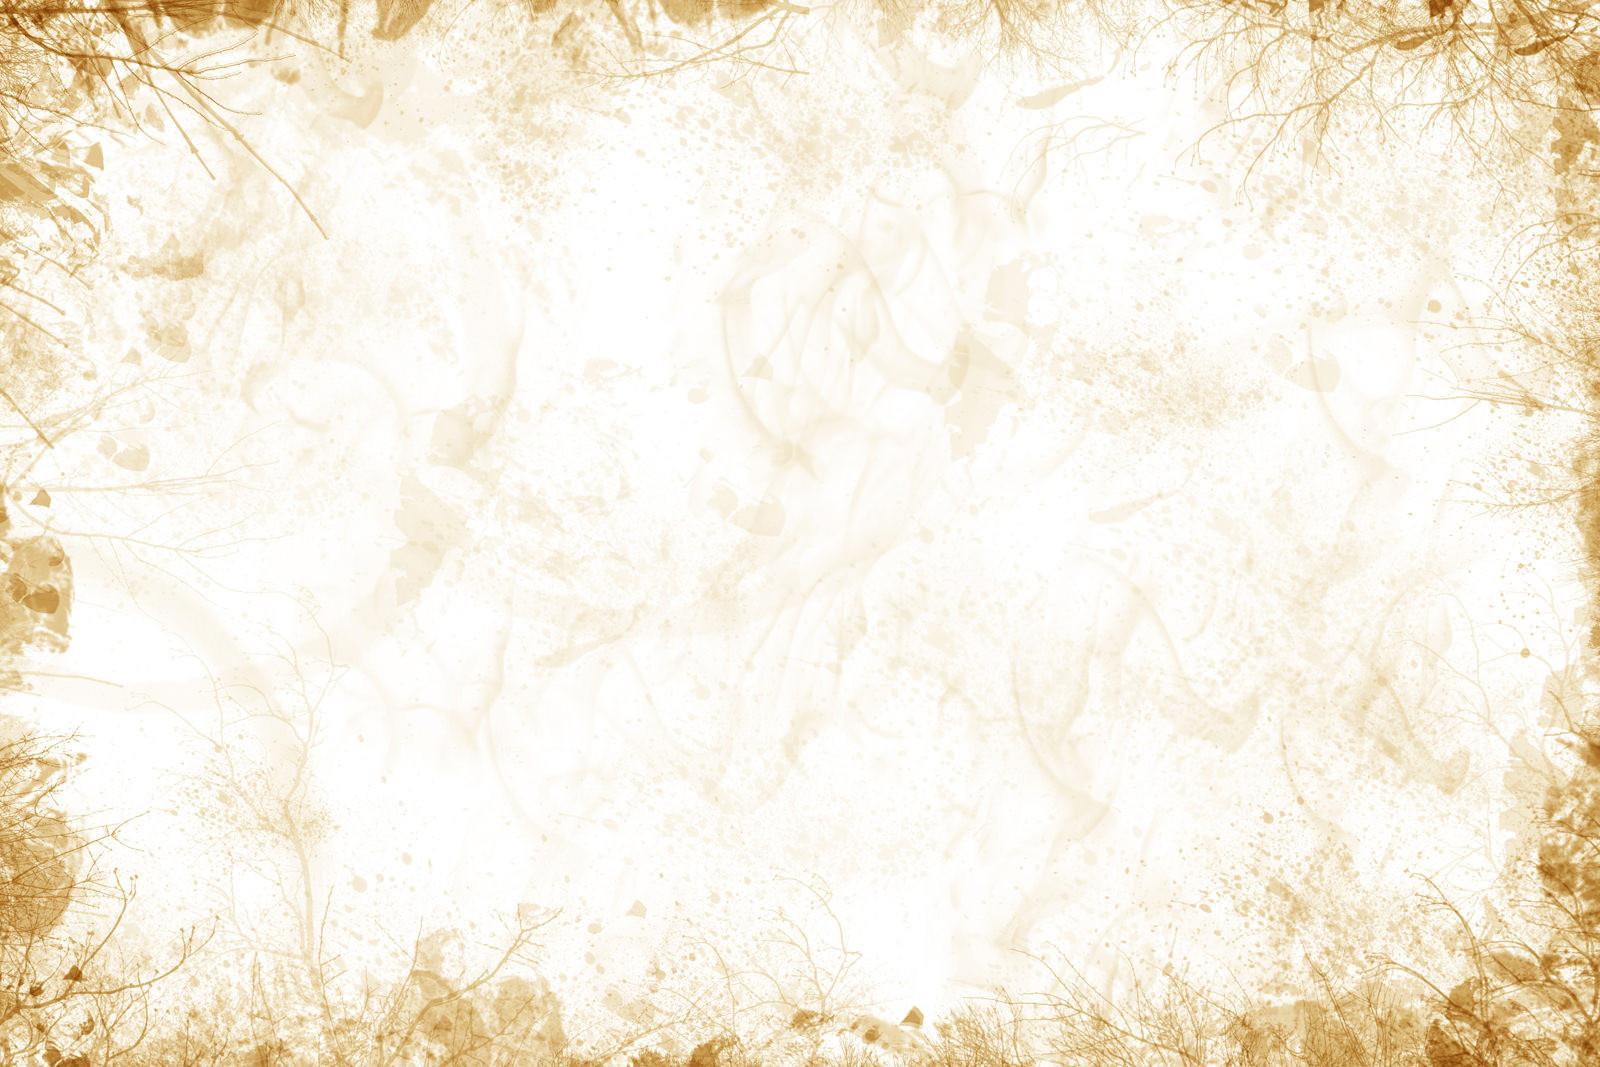 Black and White and Gold Wallpaper Lovely Gold Wallpaper Wallpaper